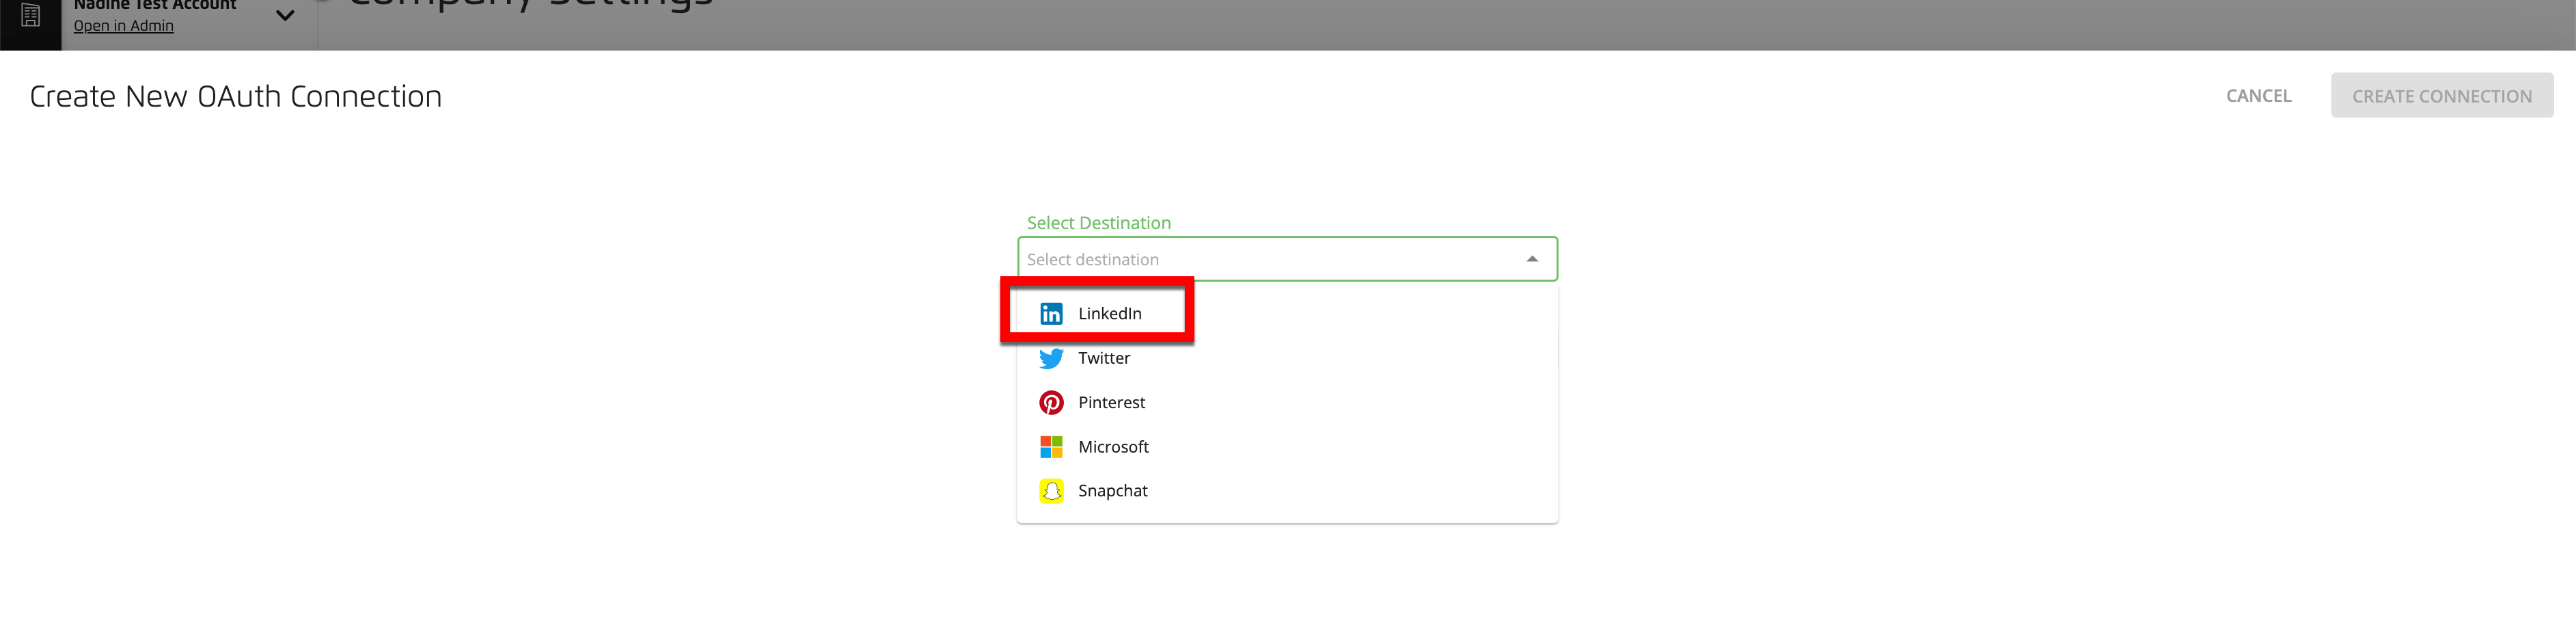 C-_Create_New__OAuth__Connection-New__Destination_dropdown_LinkedIn.png